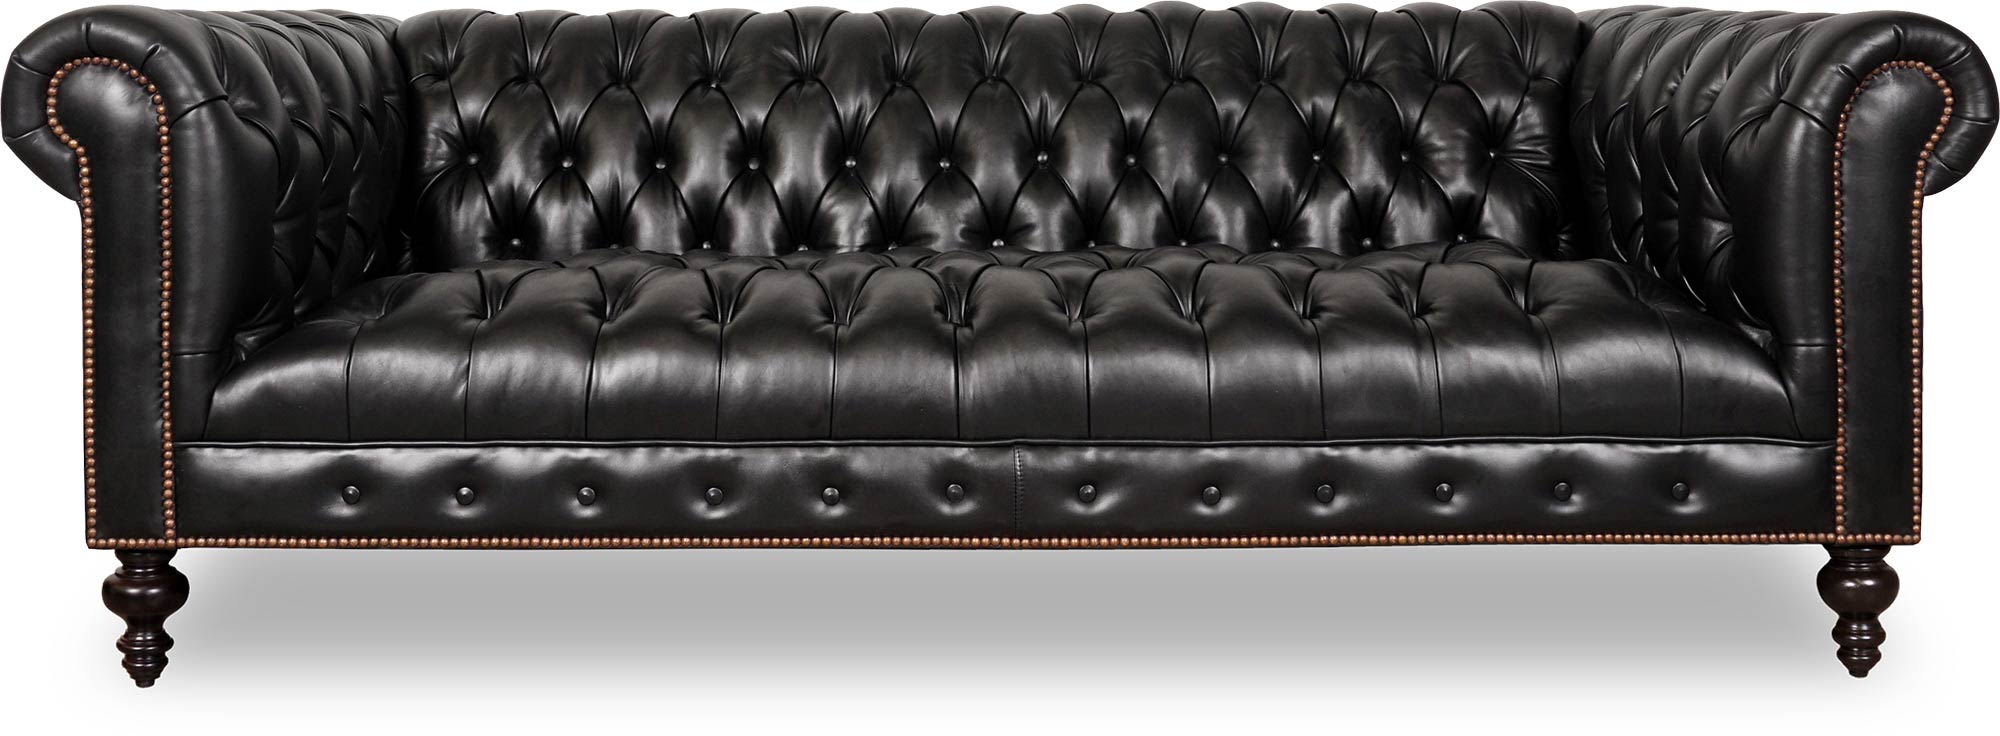 Chesterfield Sofas Armchairs, Best Brand Of Chesterfield Sofa